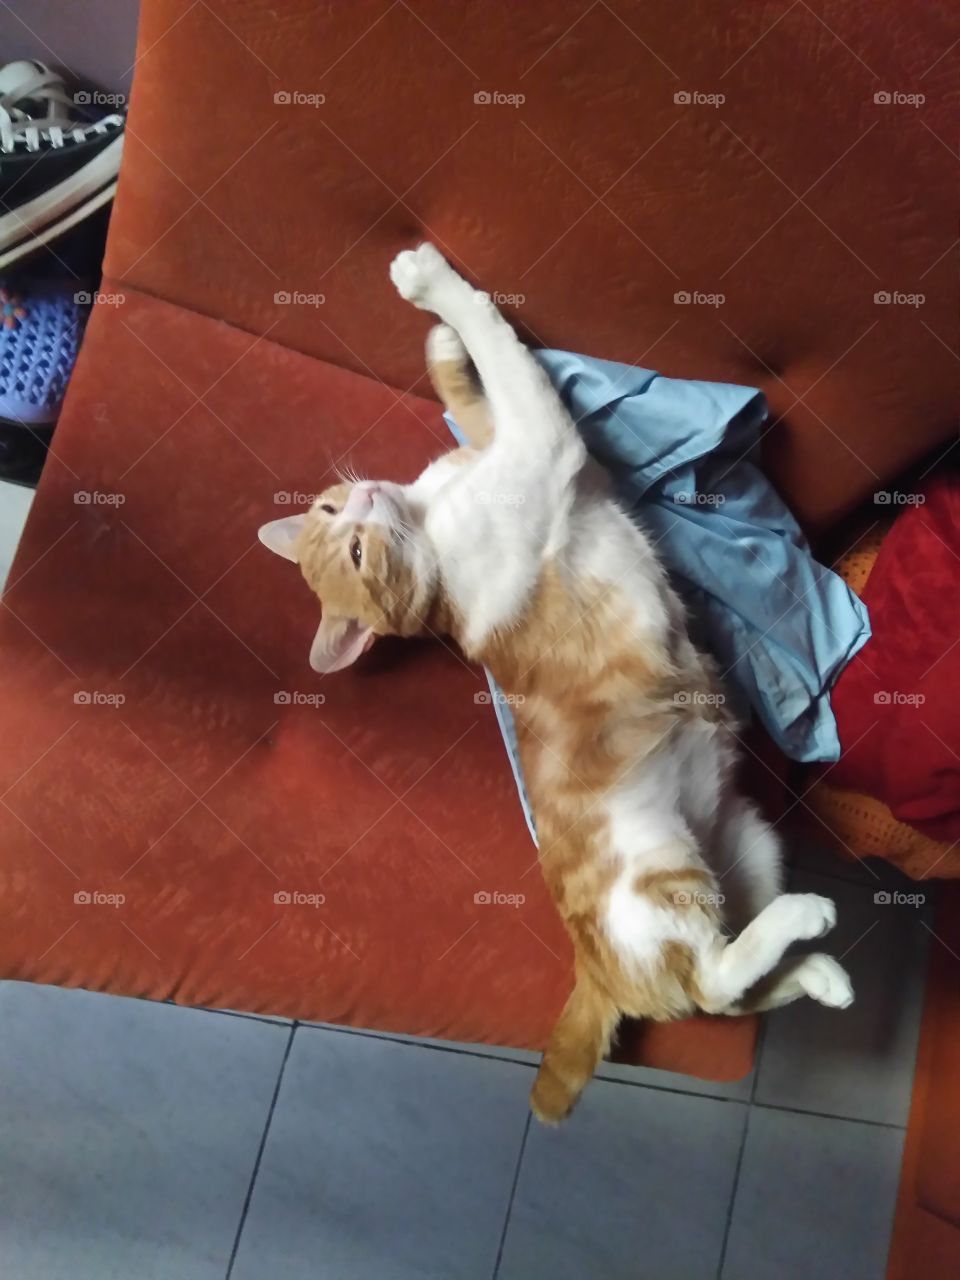 Just a kitty things. My cat named Fluffy just lying there and acting cute. But he's not so nice at all :D